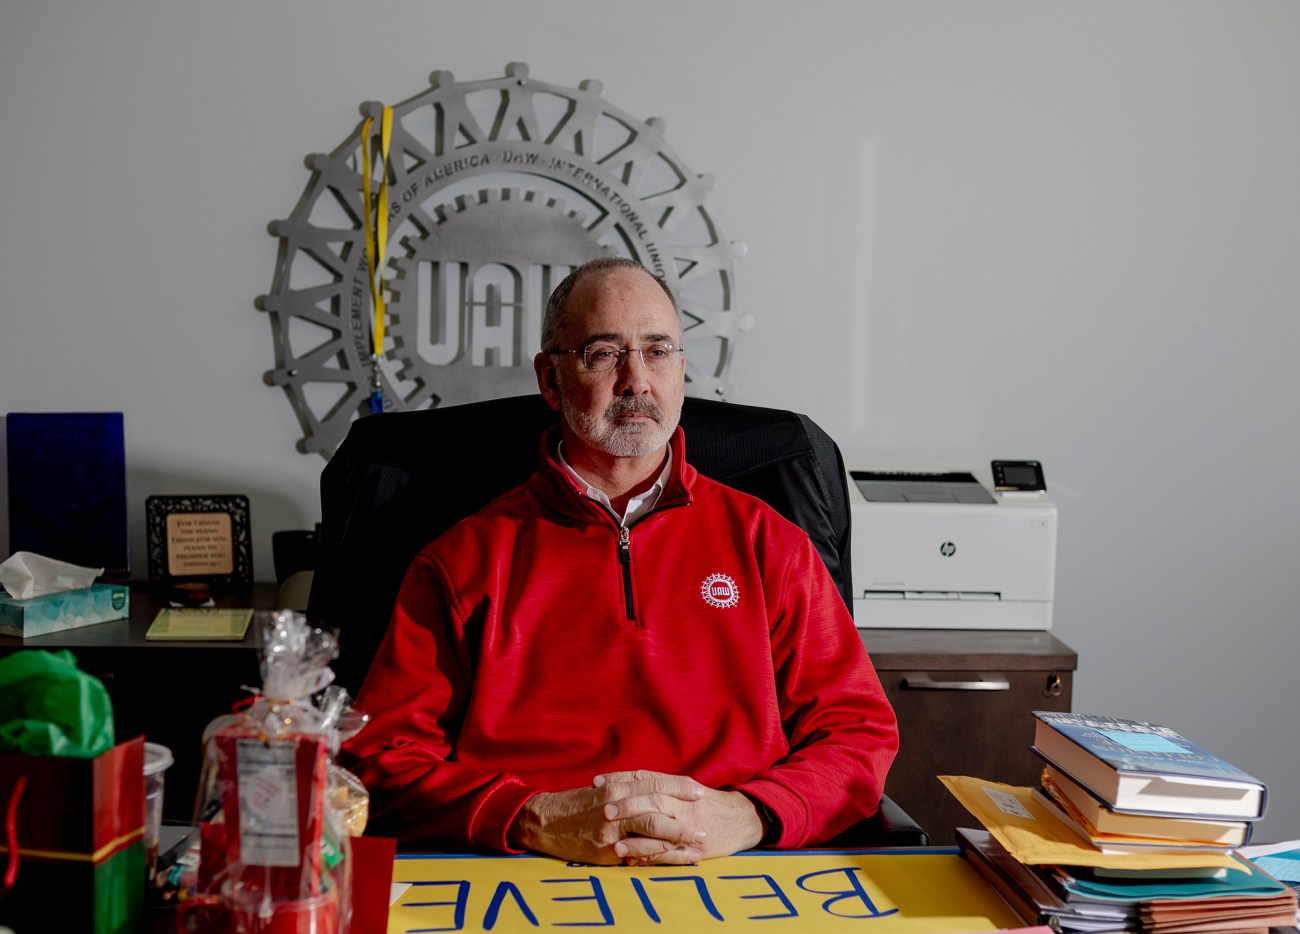 Shawn Fain, president of the UAW, sitting at a desk with the UAW logo beind him.